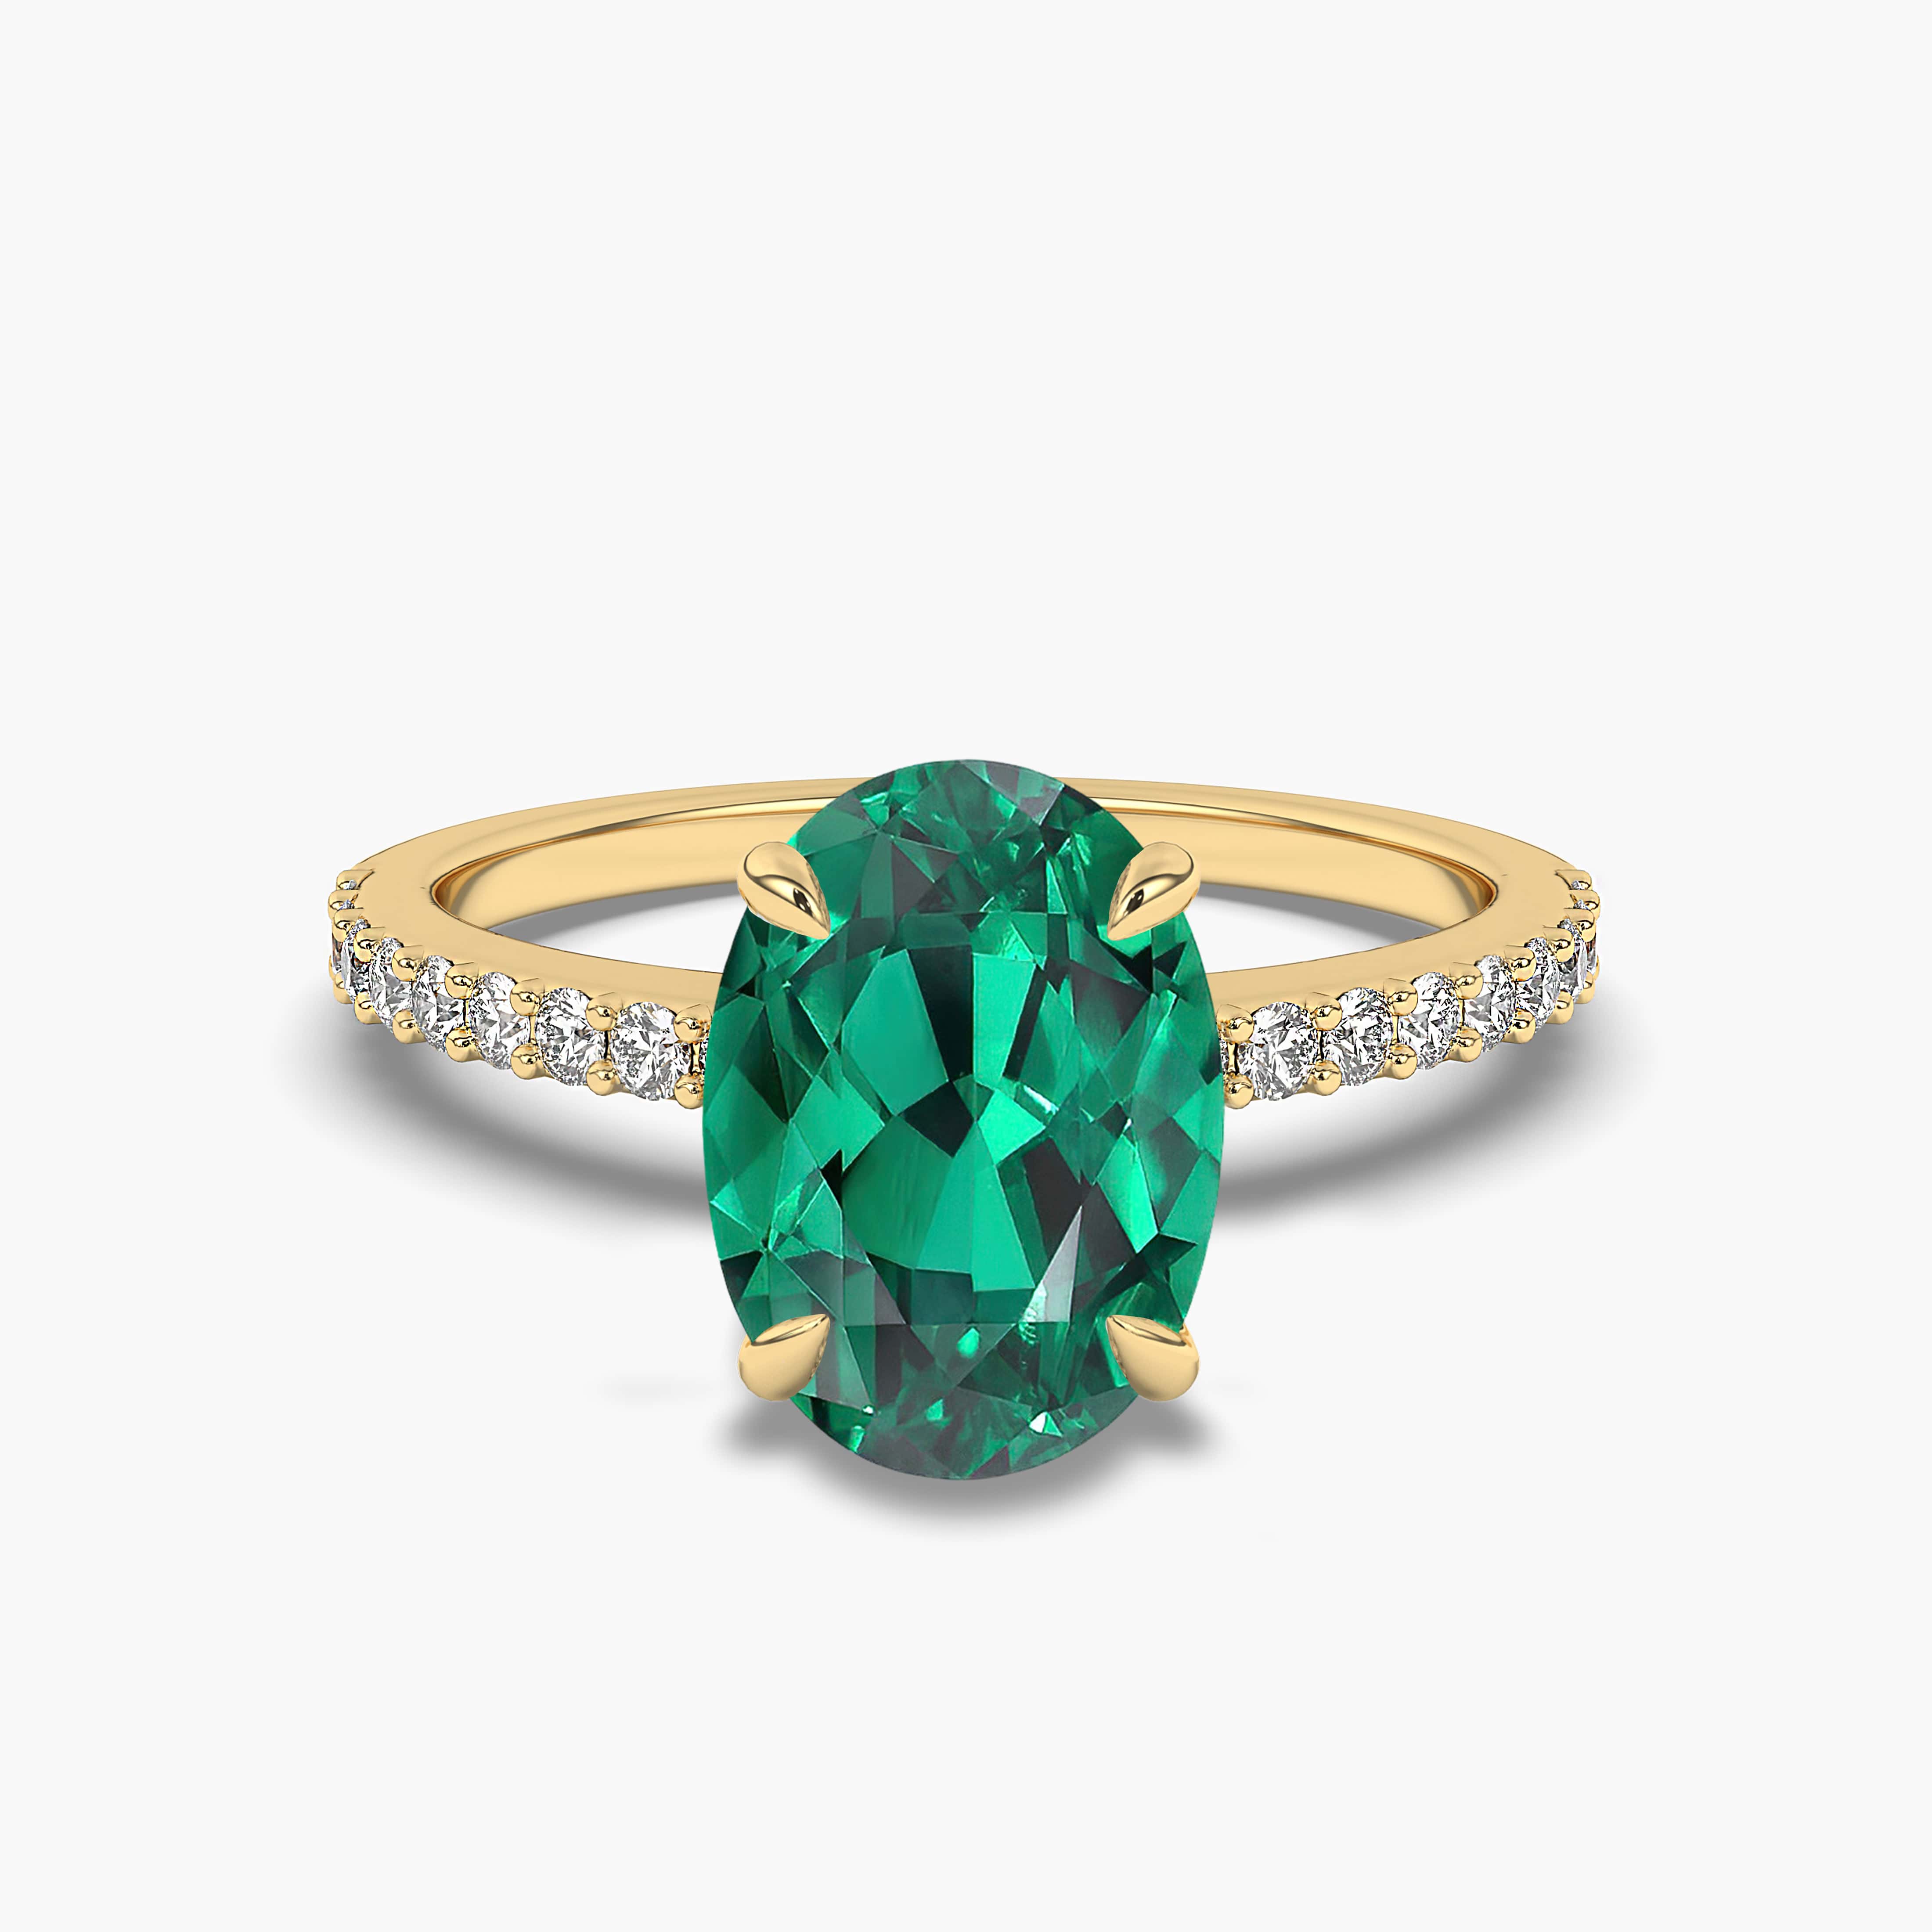 Oval Cut Emerald & Diamond Ring With Yellow Gold